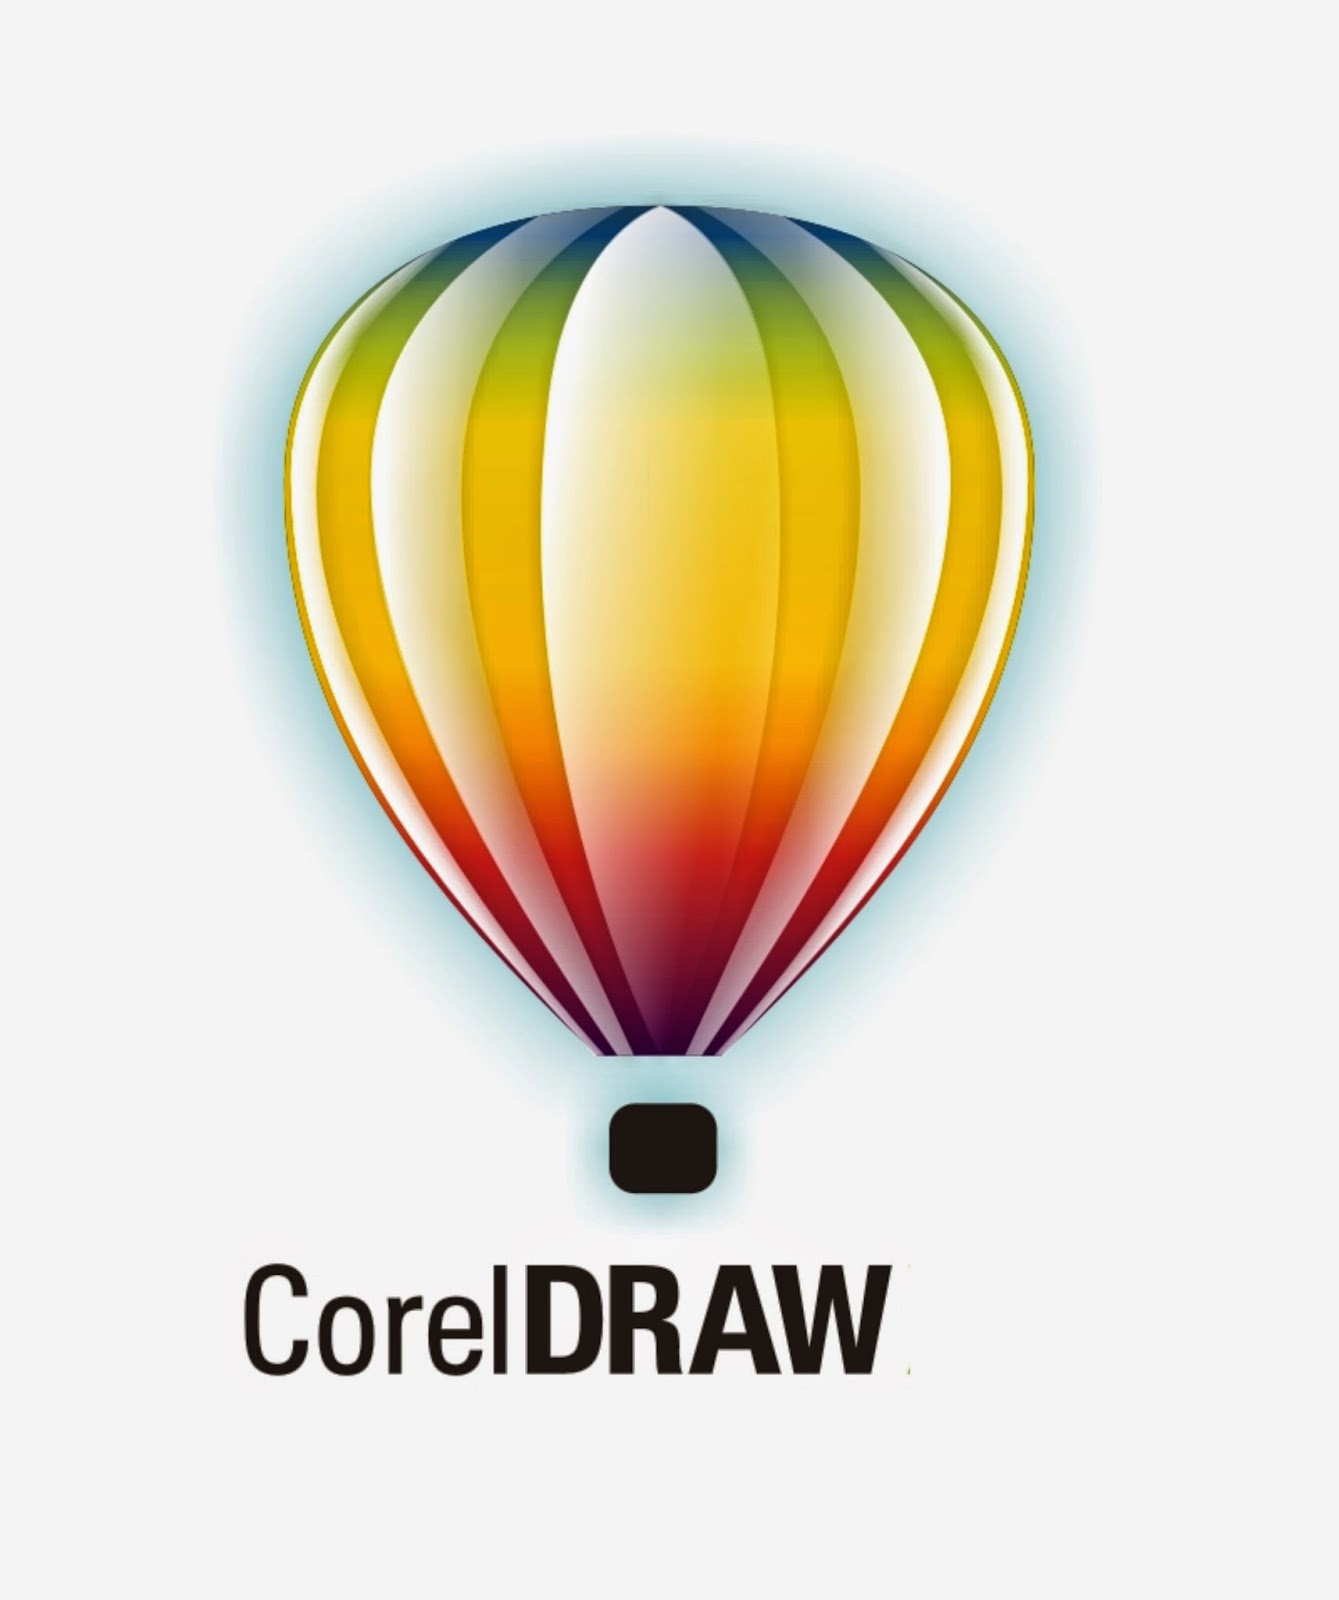 Download Corel Draw X7 Portable For Windows 7/8/10 Full Verion [Official]